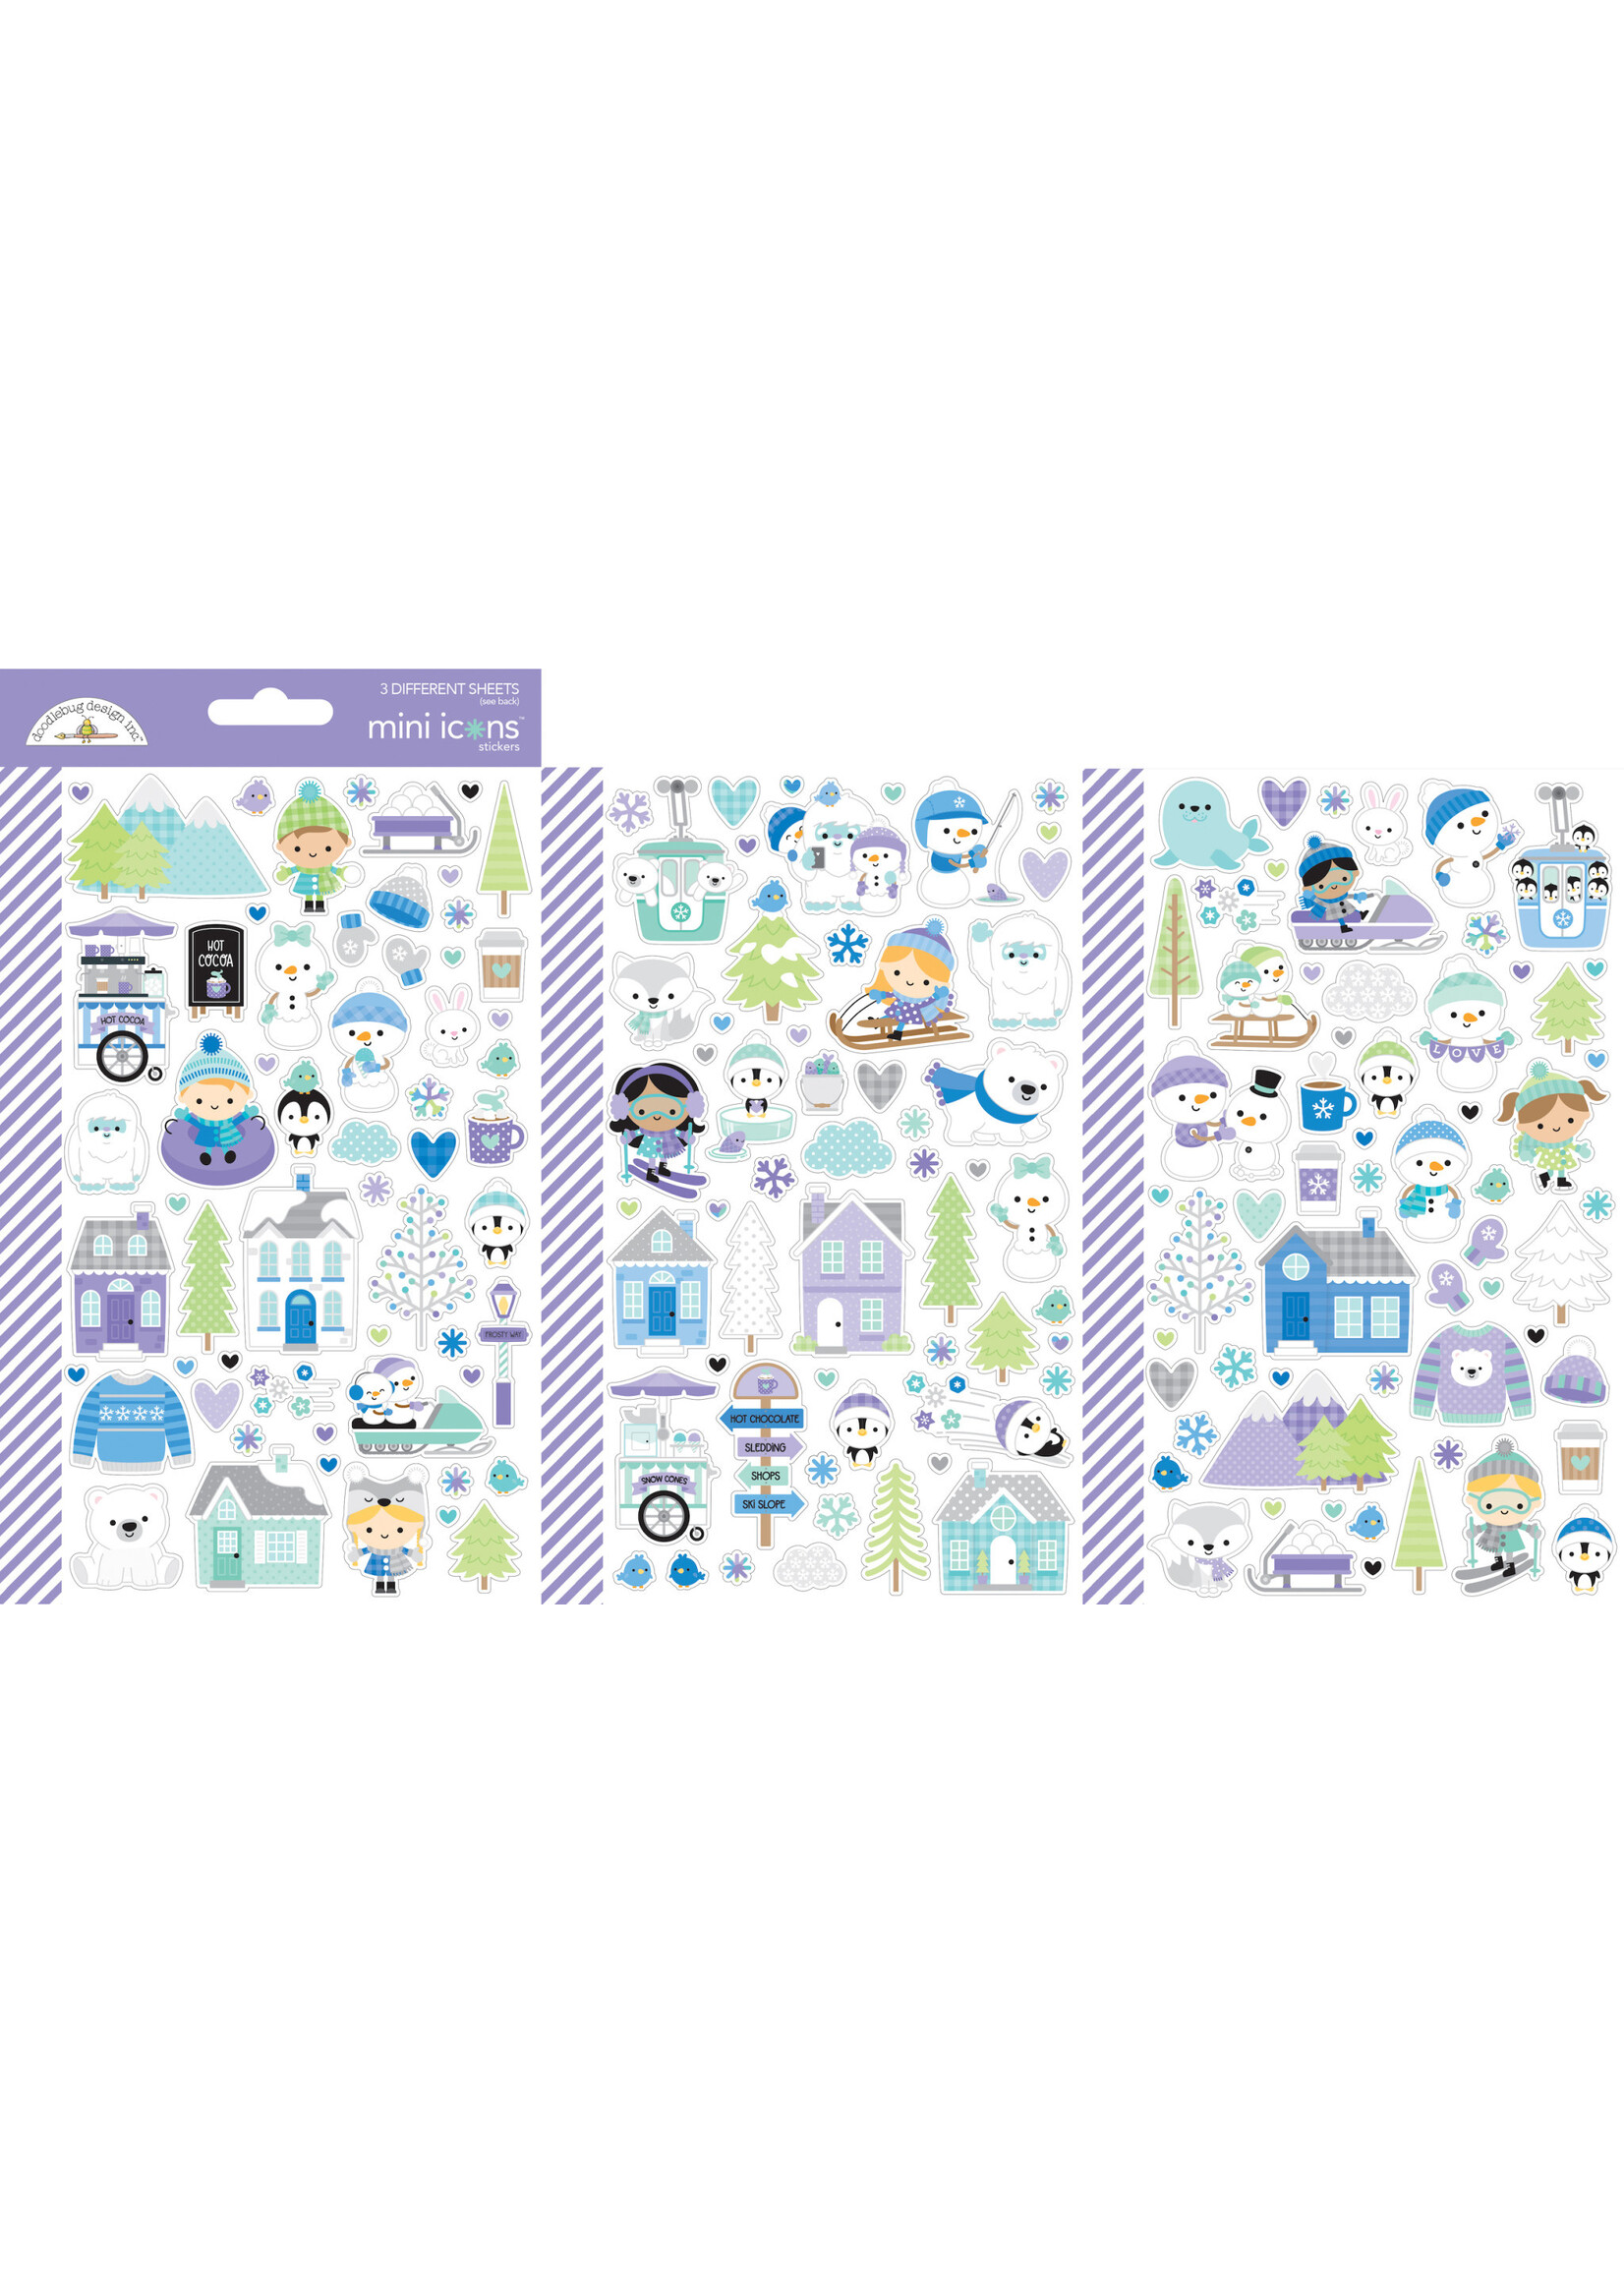 DOODLEBUG snow much fun mini icons stickers